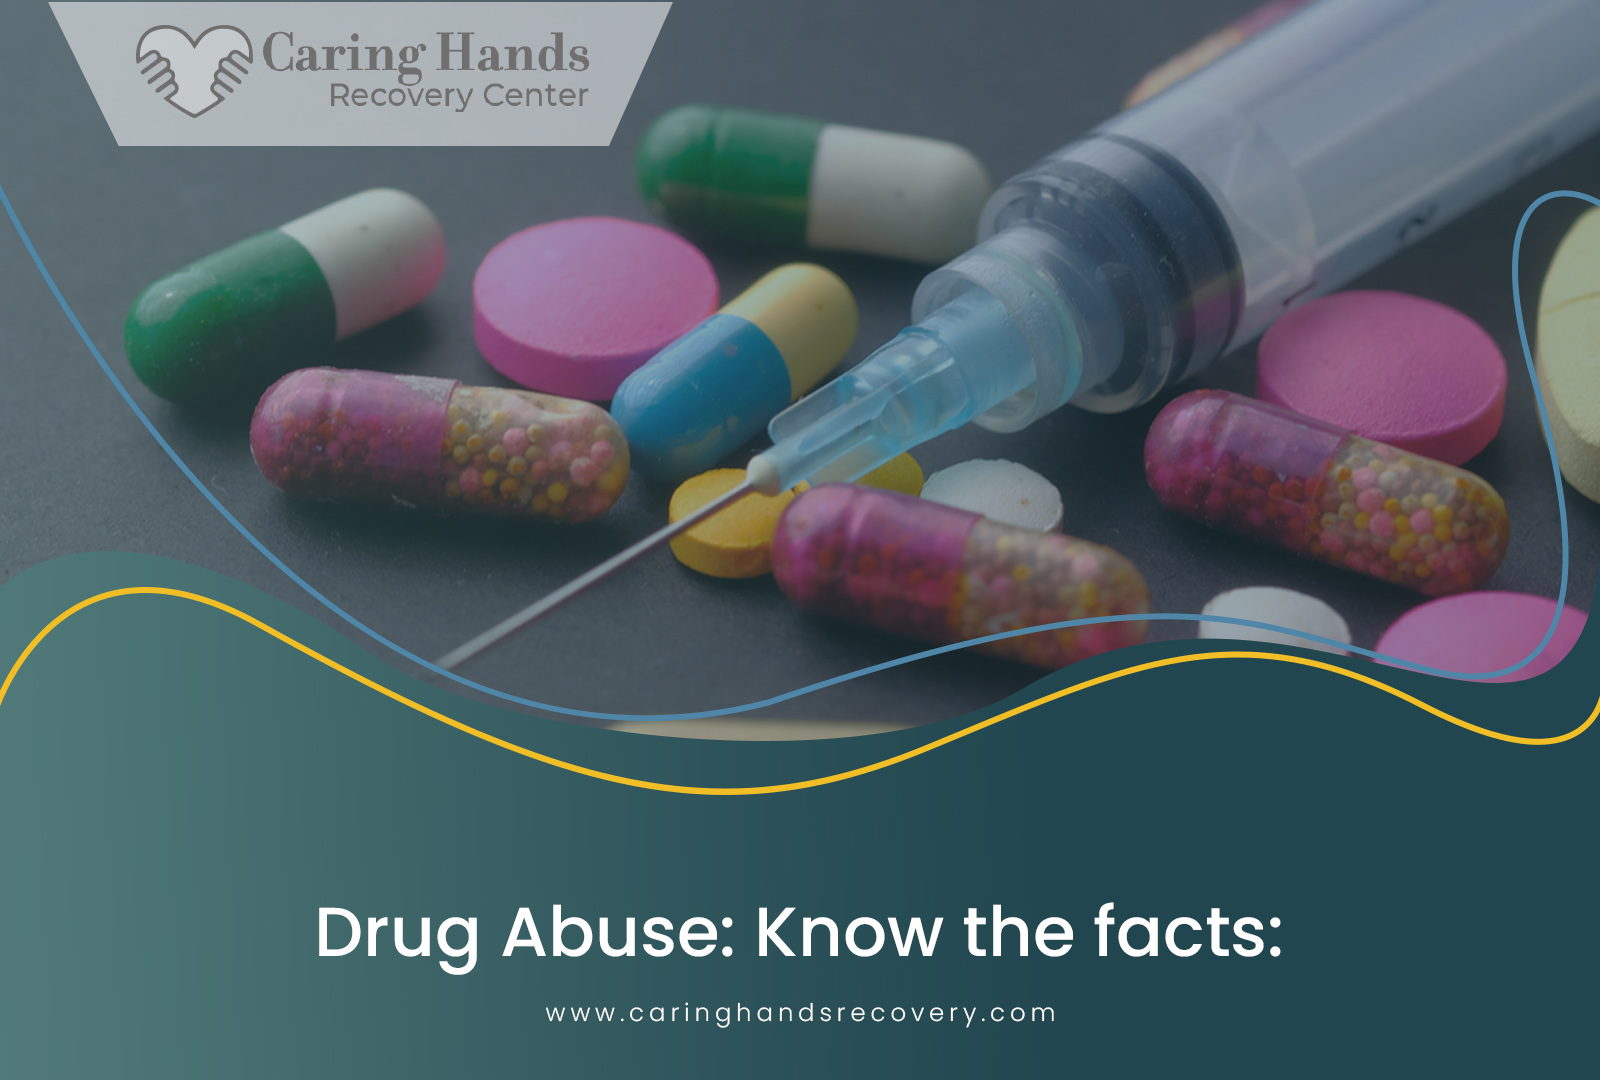 DRUG ABUSE: KNOW THE FACTS